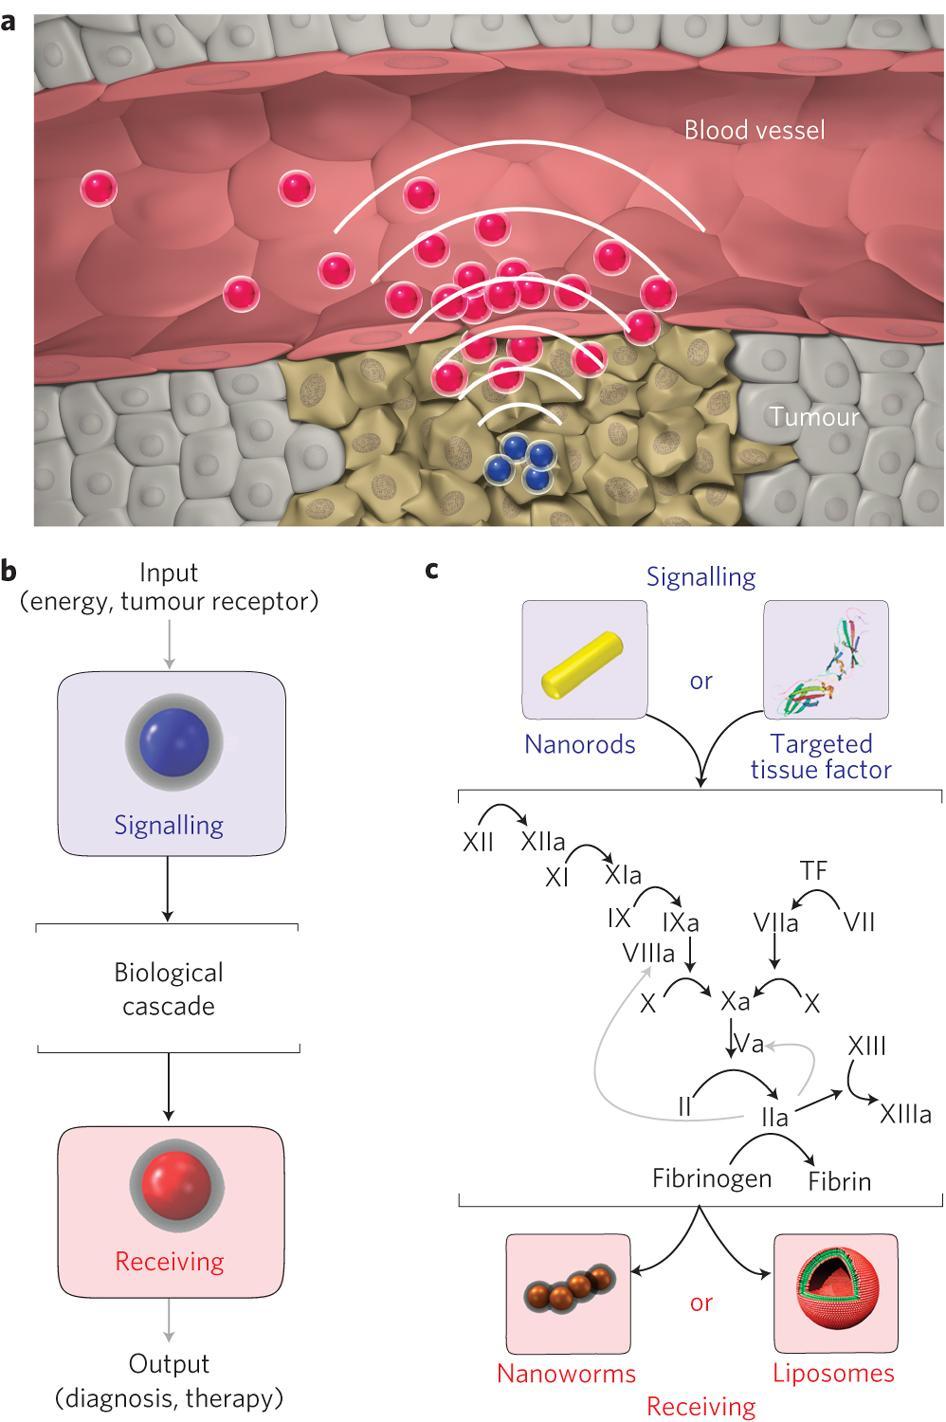 Nanoparticles communication for amplified tumor targeting